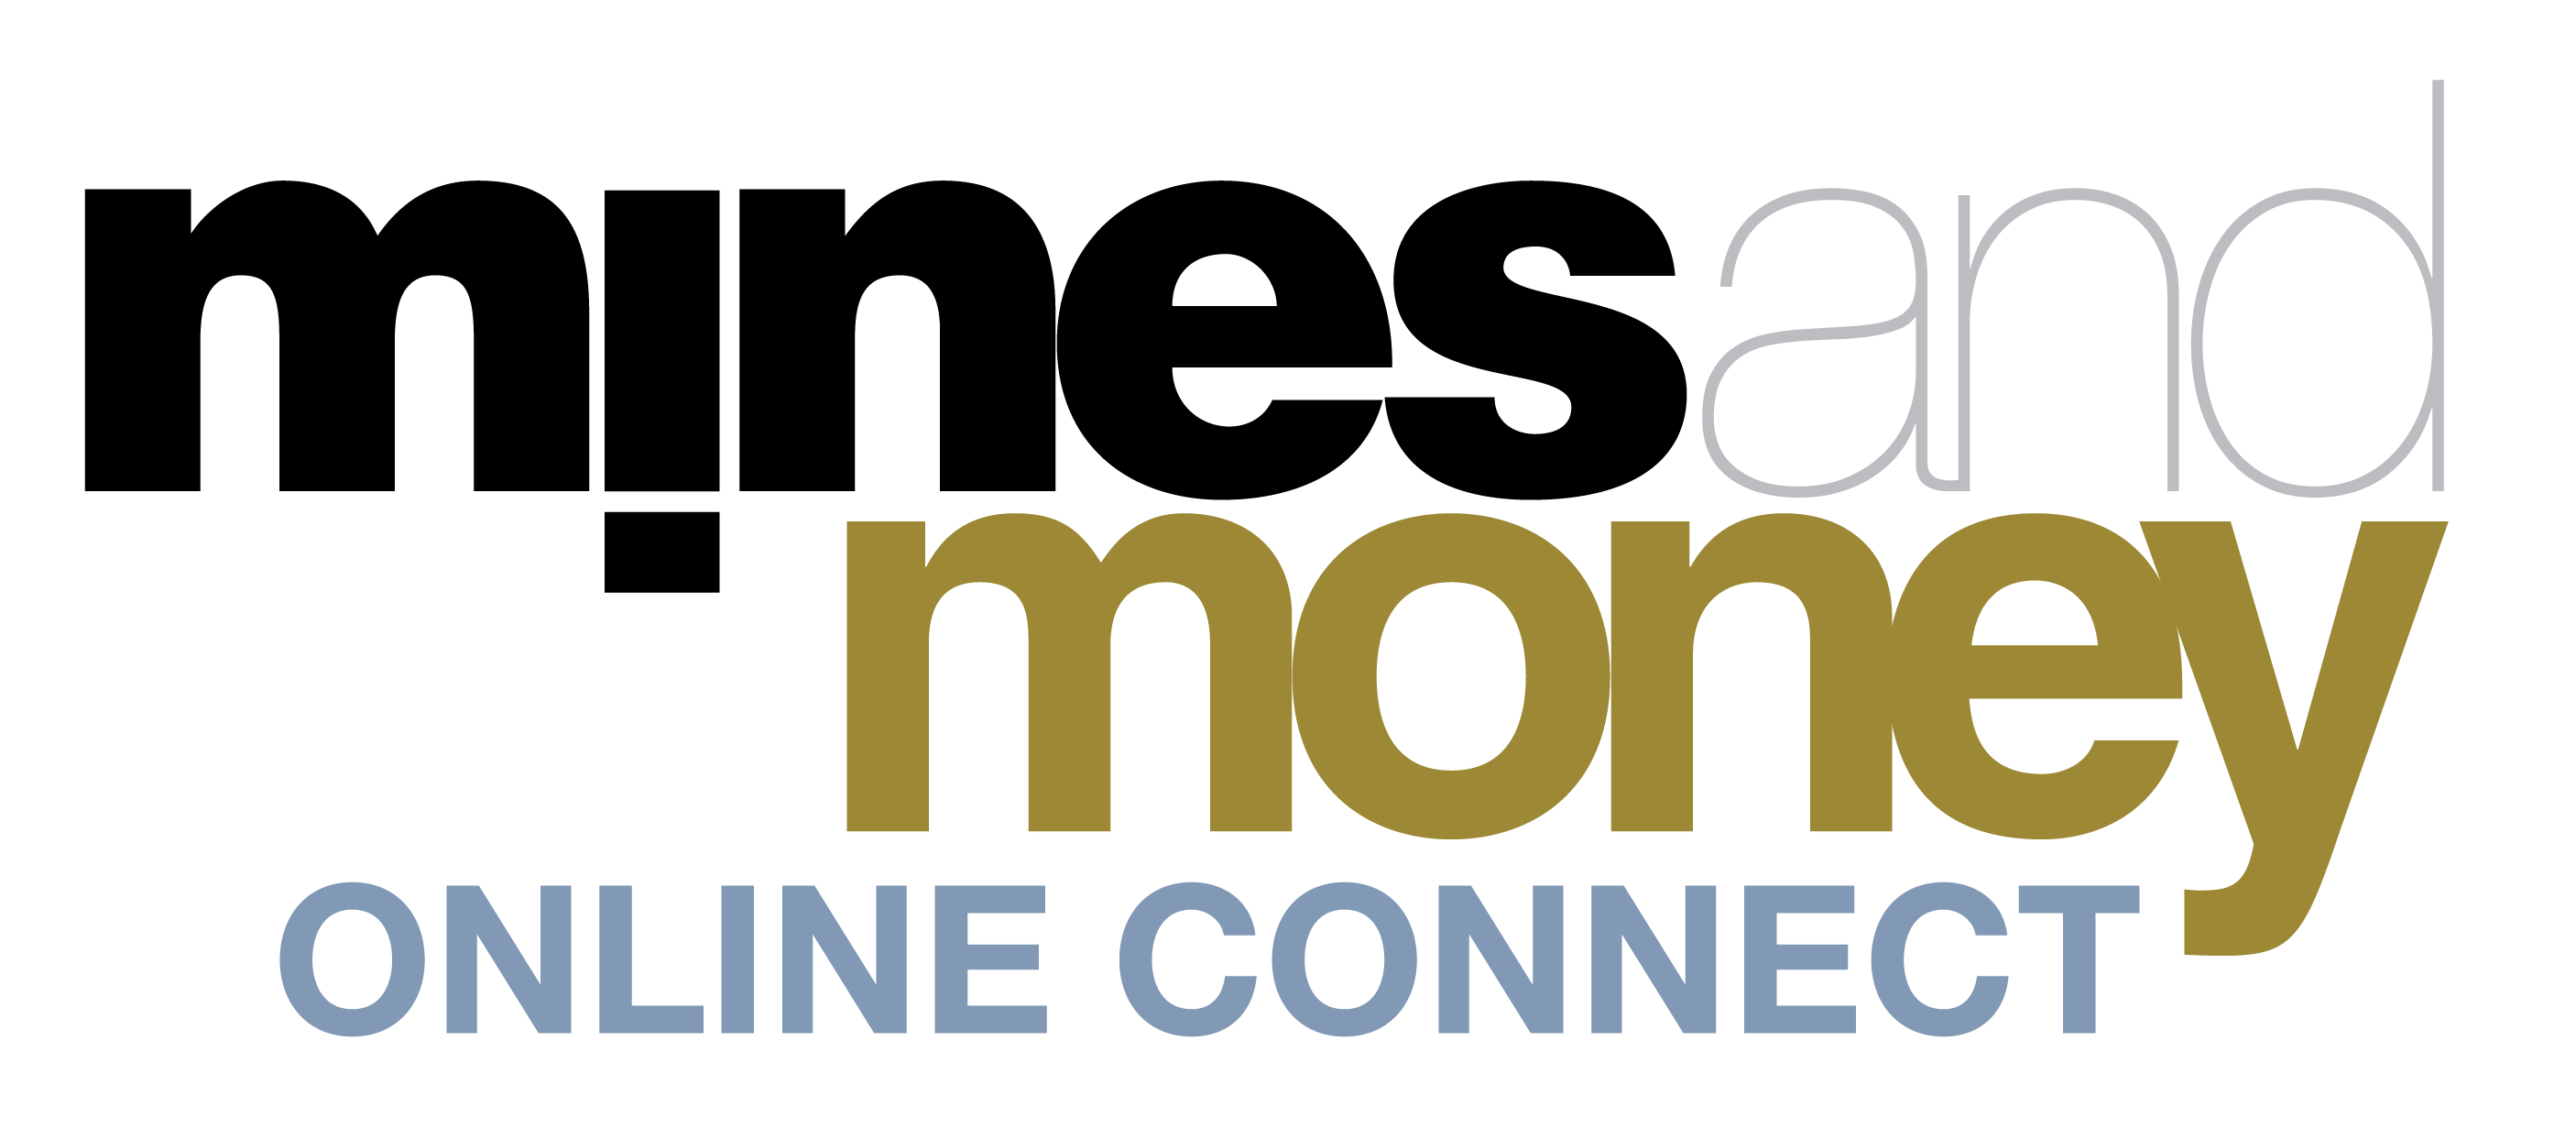 Mines and Money Online Connect organized by Mines and Money